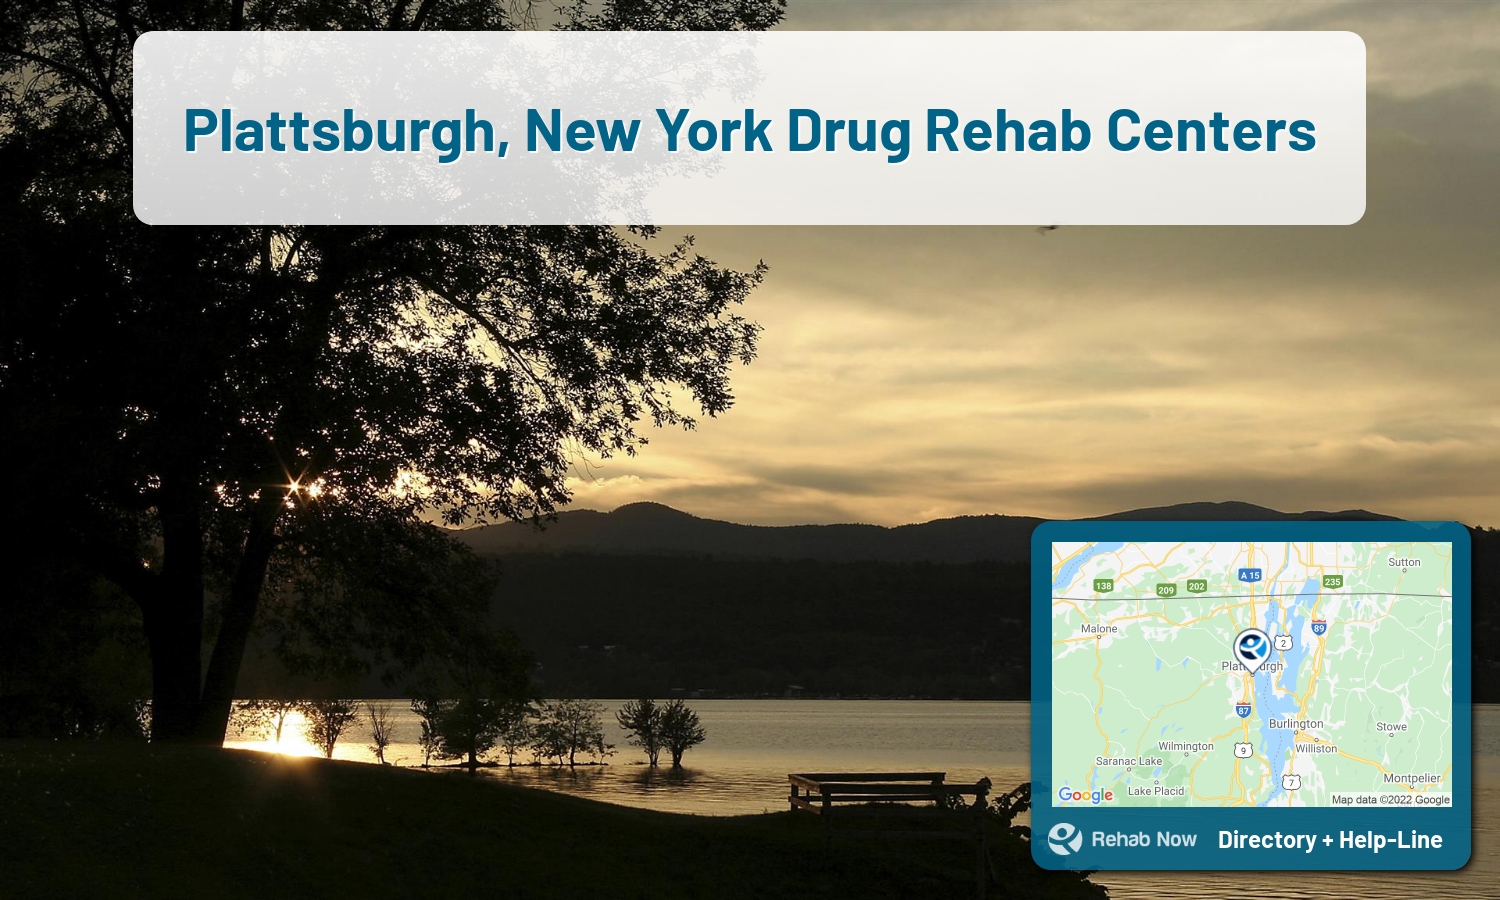 Plattsburgh, NY Treatment Centers. Find drug rehab in Plattsburgh, New York, or detox and treatment programs. Get the right help now!